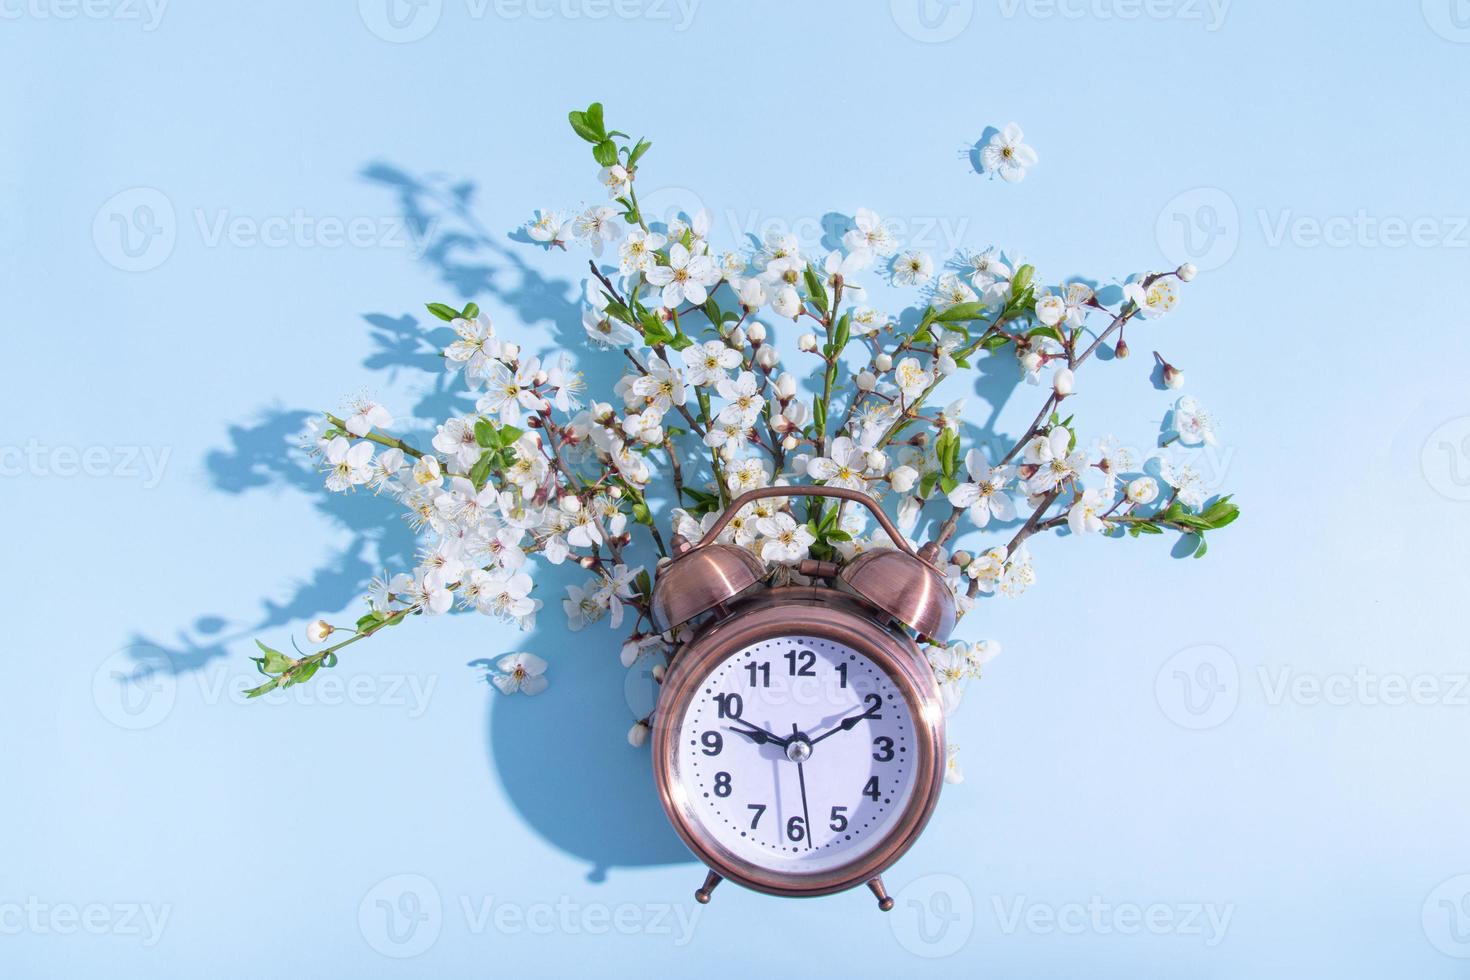 Alarm clock and blossom branches on a blue background. Flat lay, top view composition photo